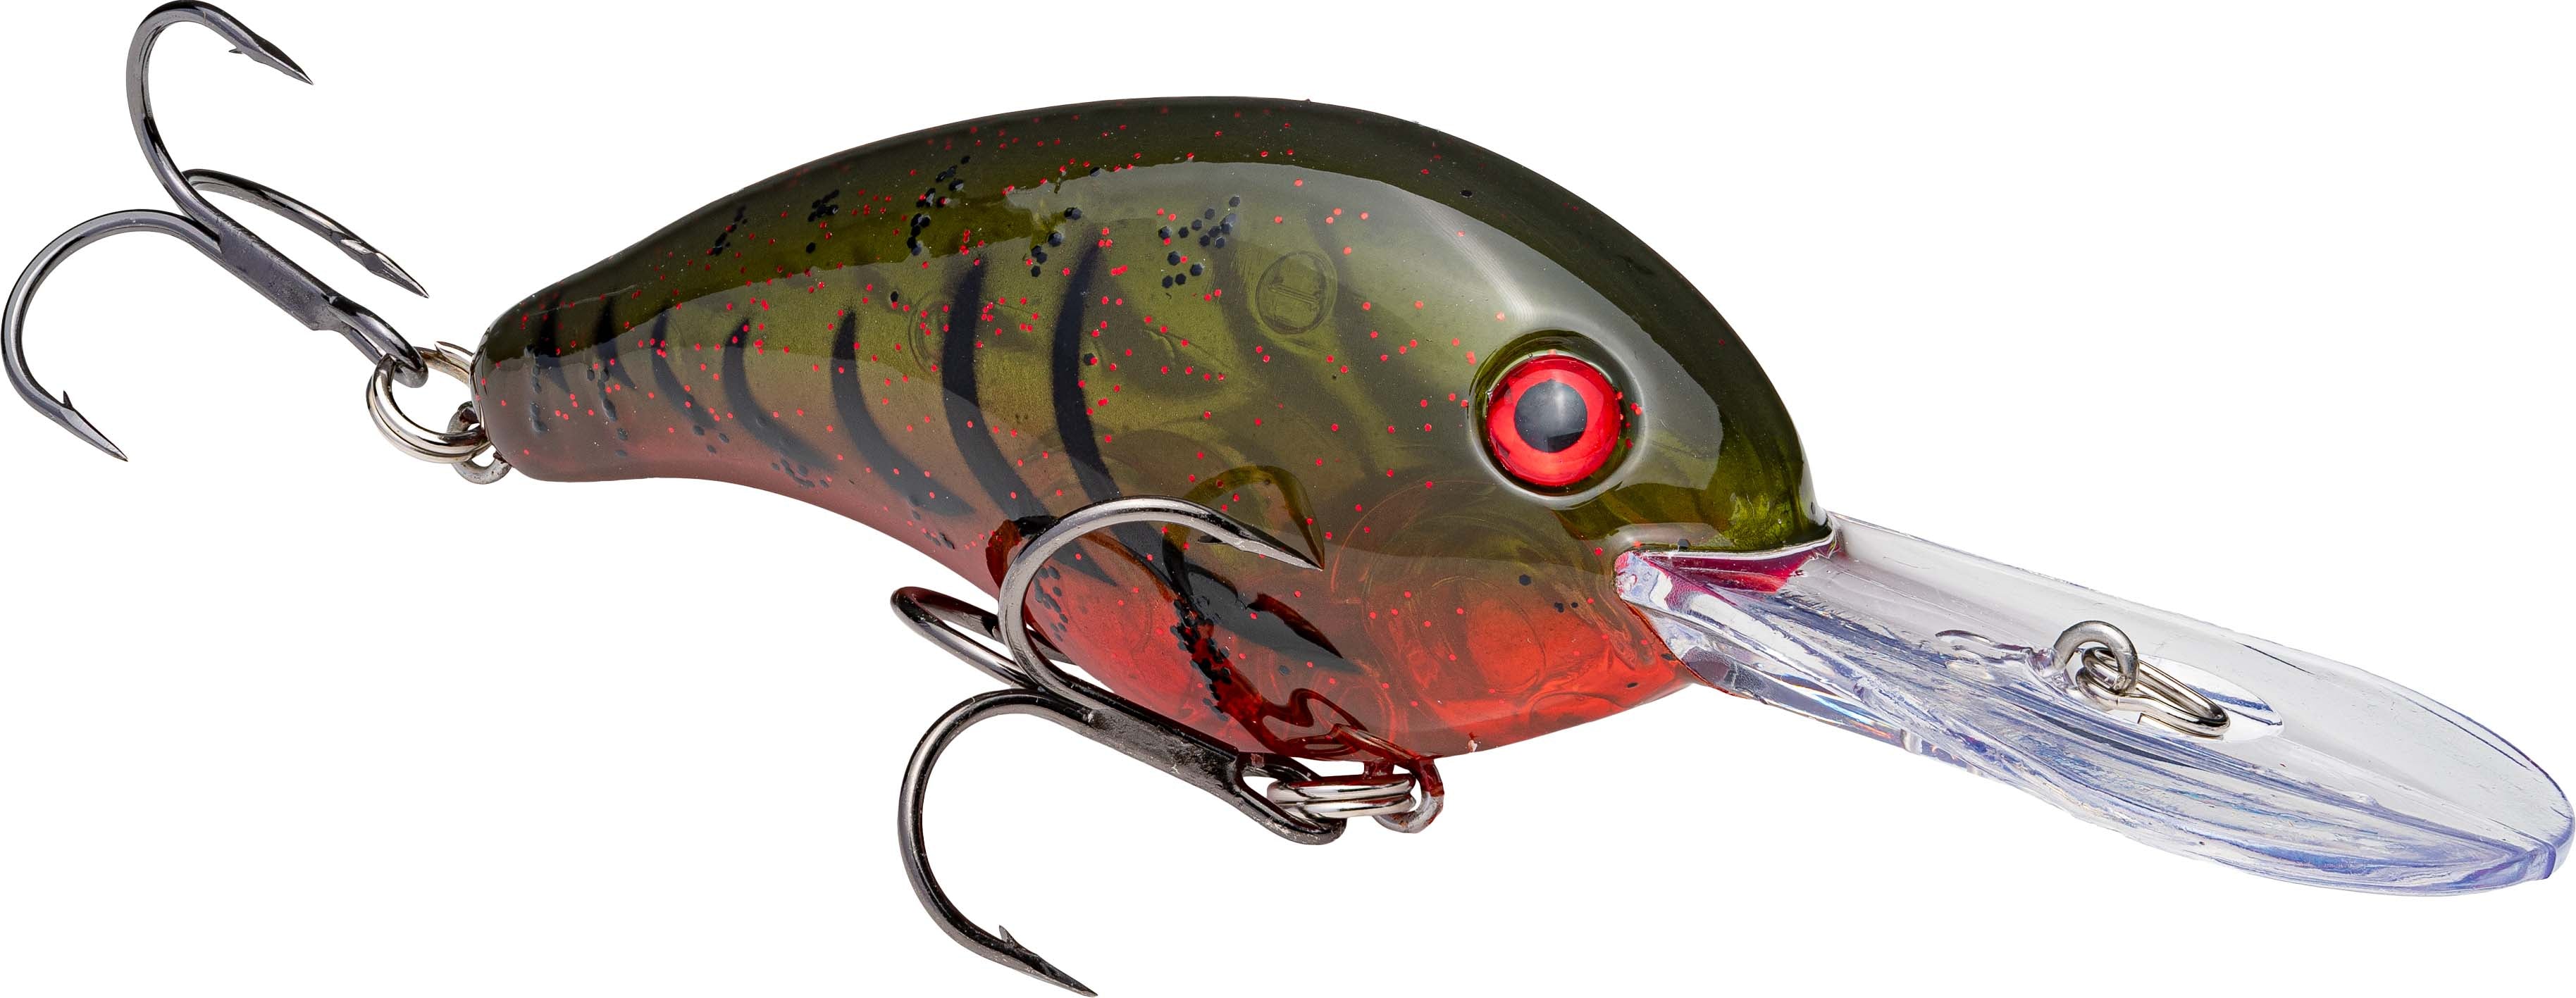 Vertical Minnow Blade Bait - Naked Red Eye